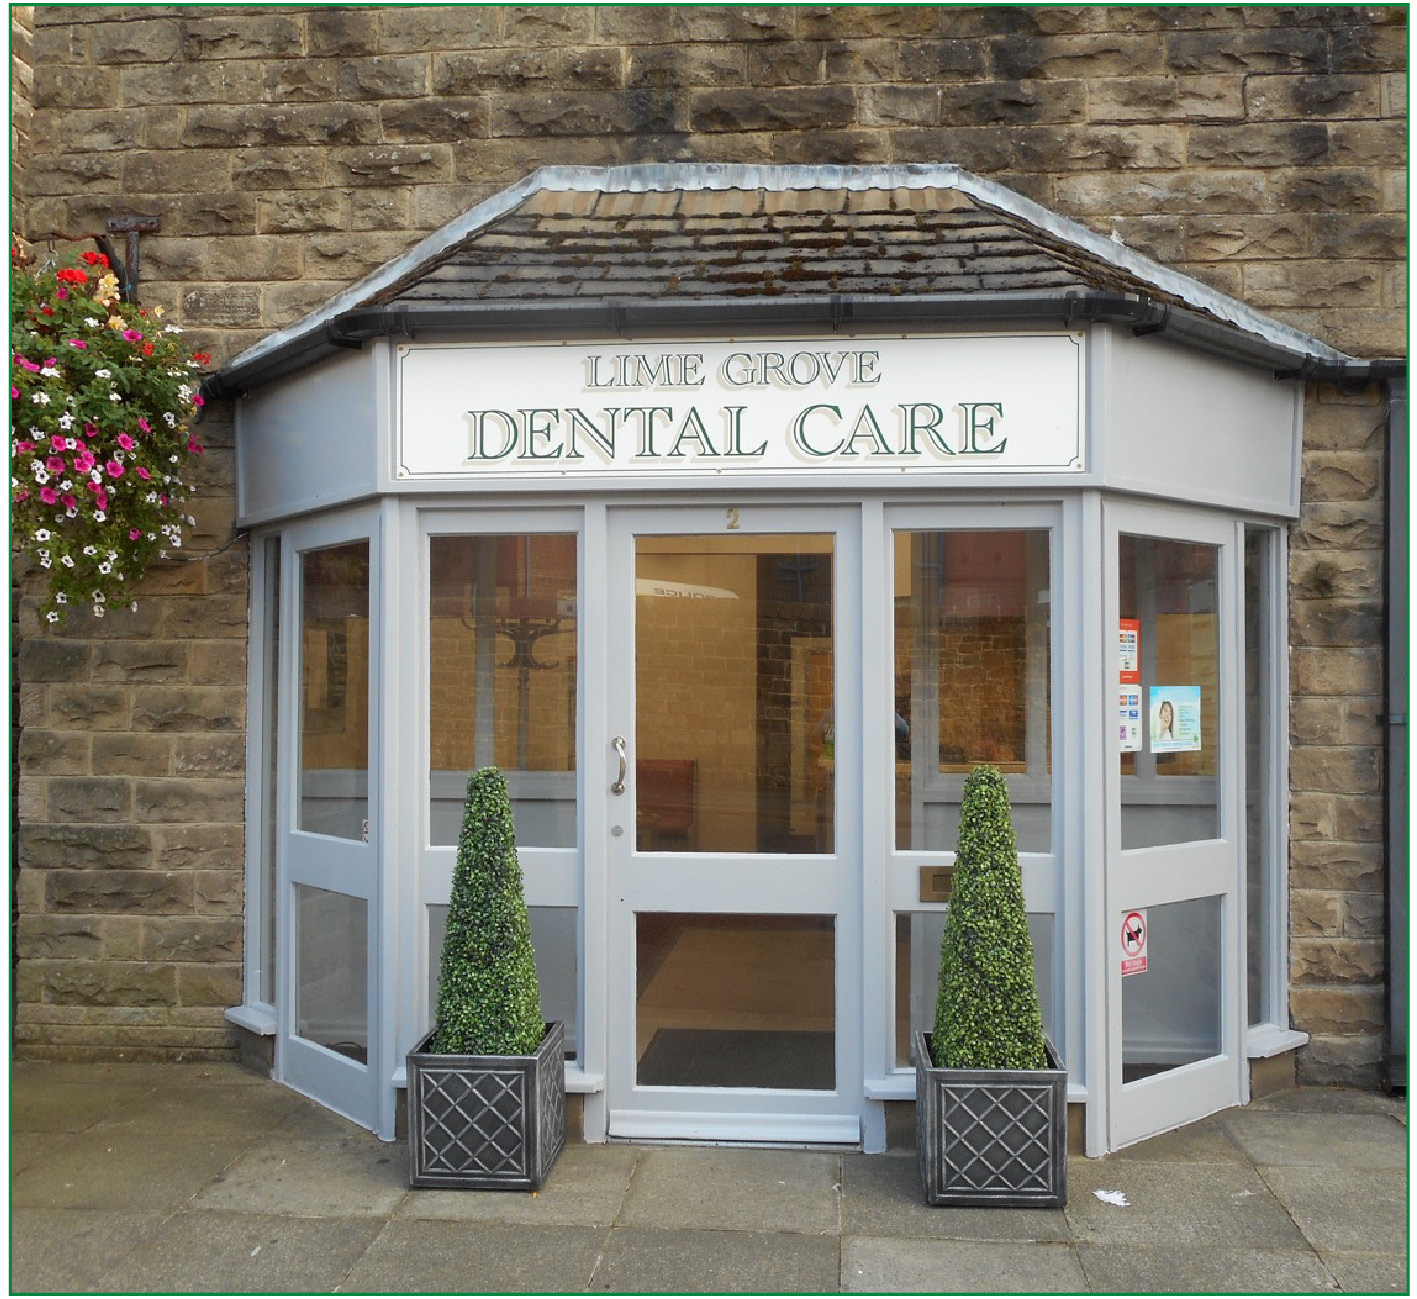 Limegrove Dental Care - Practice Front